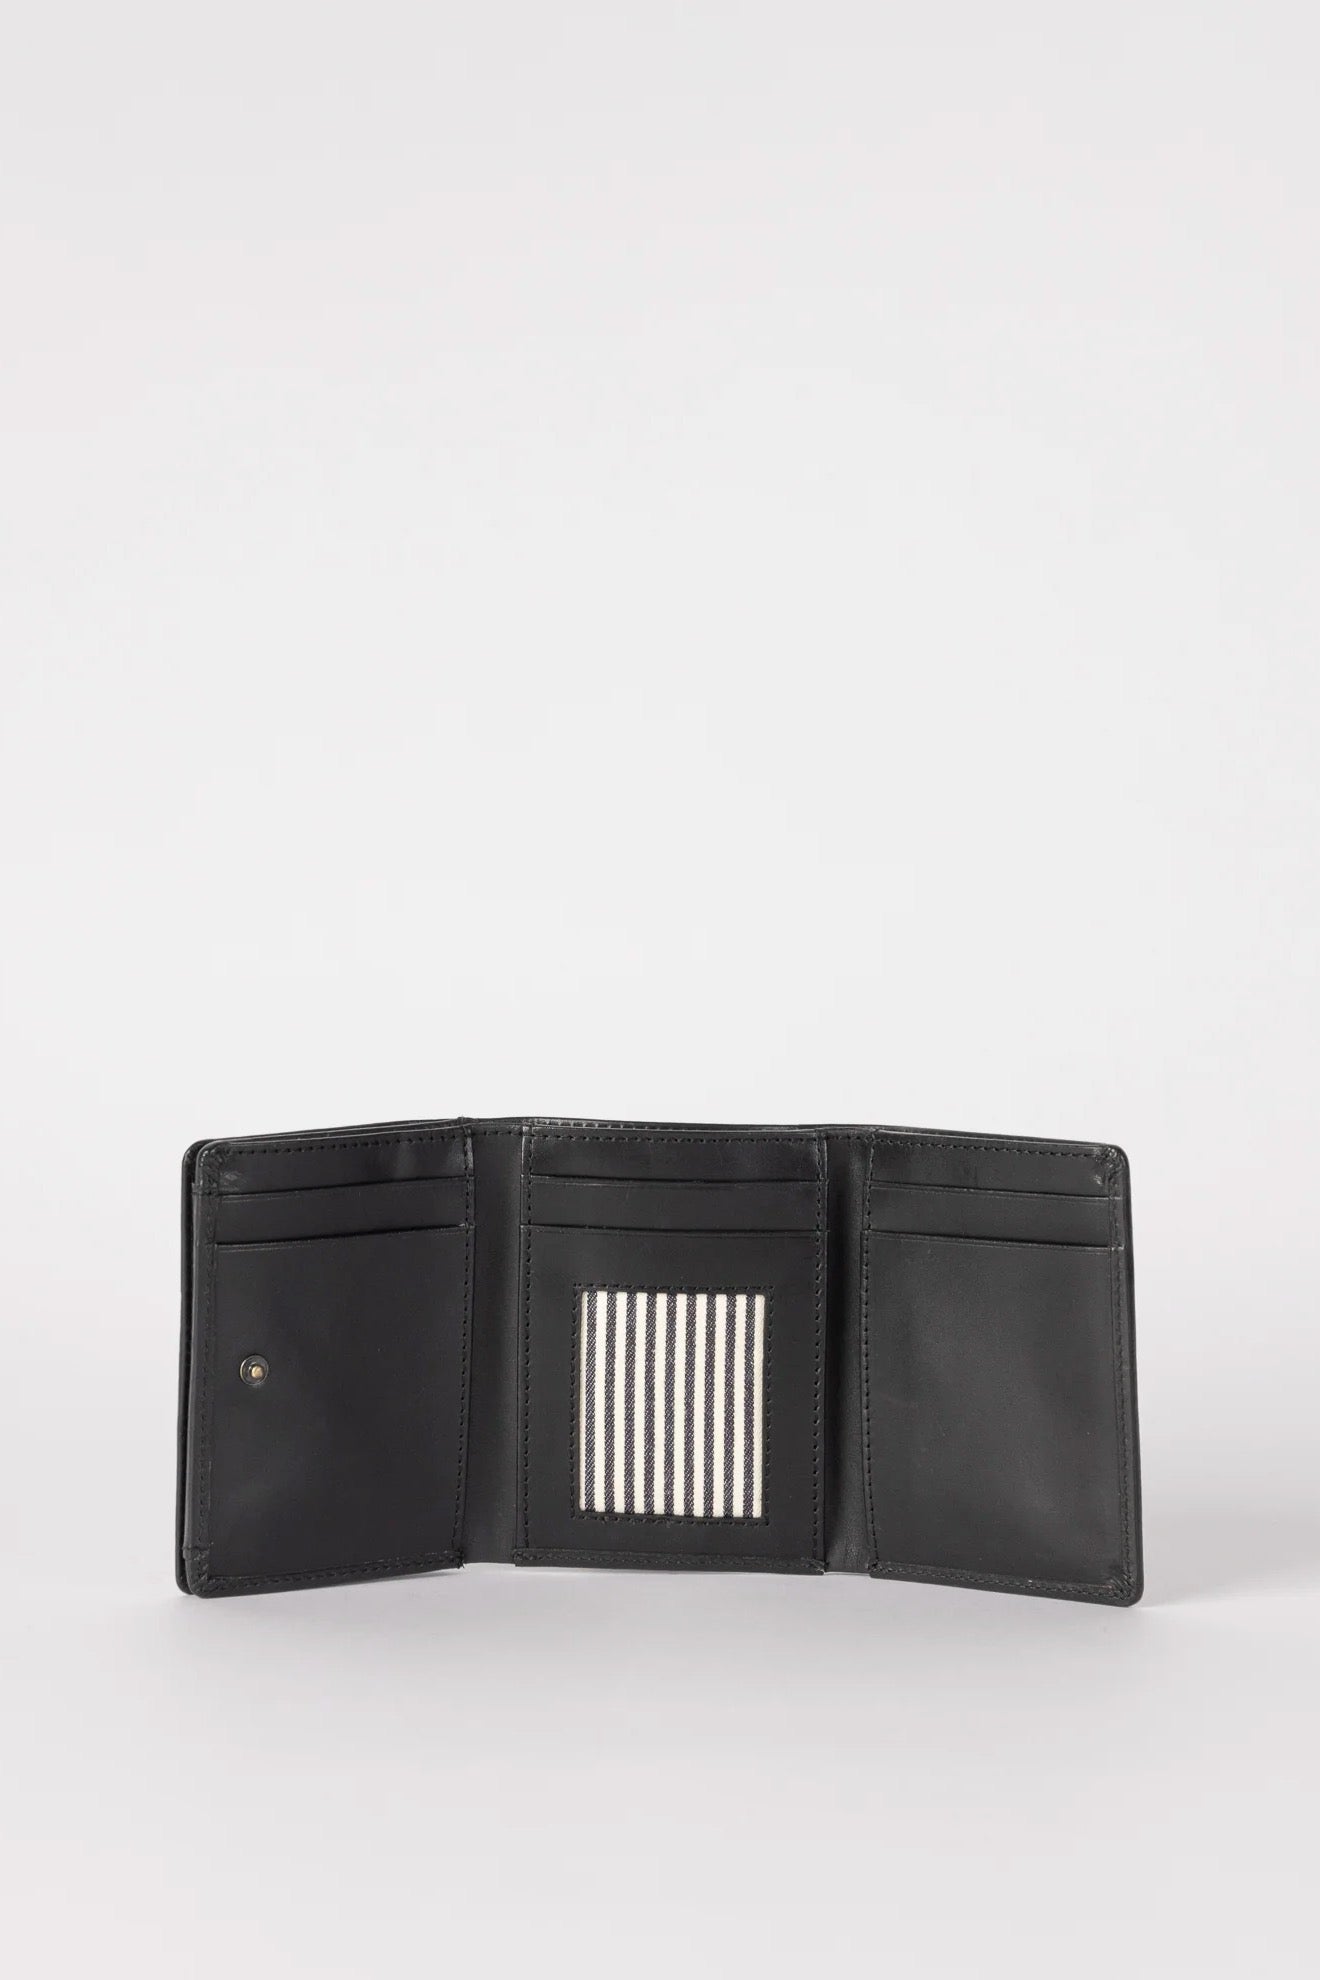 OLLIE Wallet black classic leather